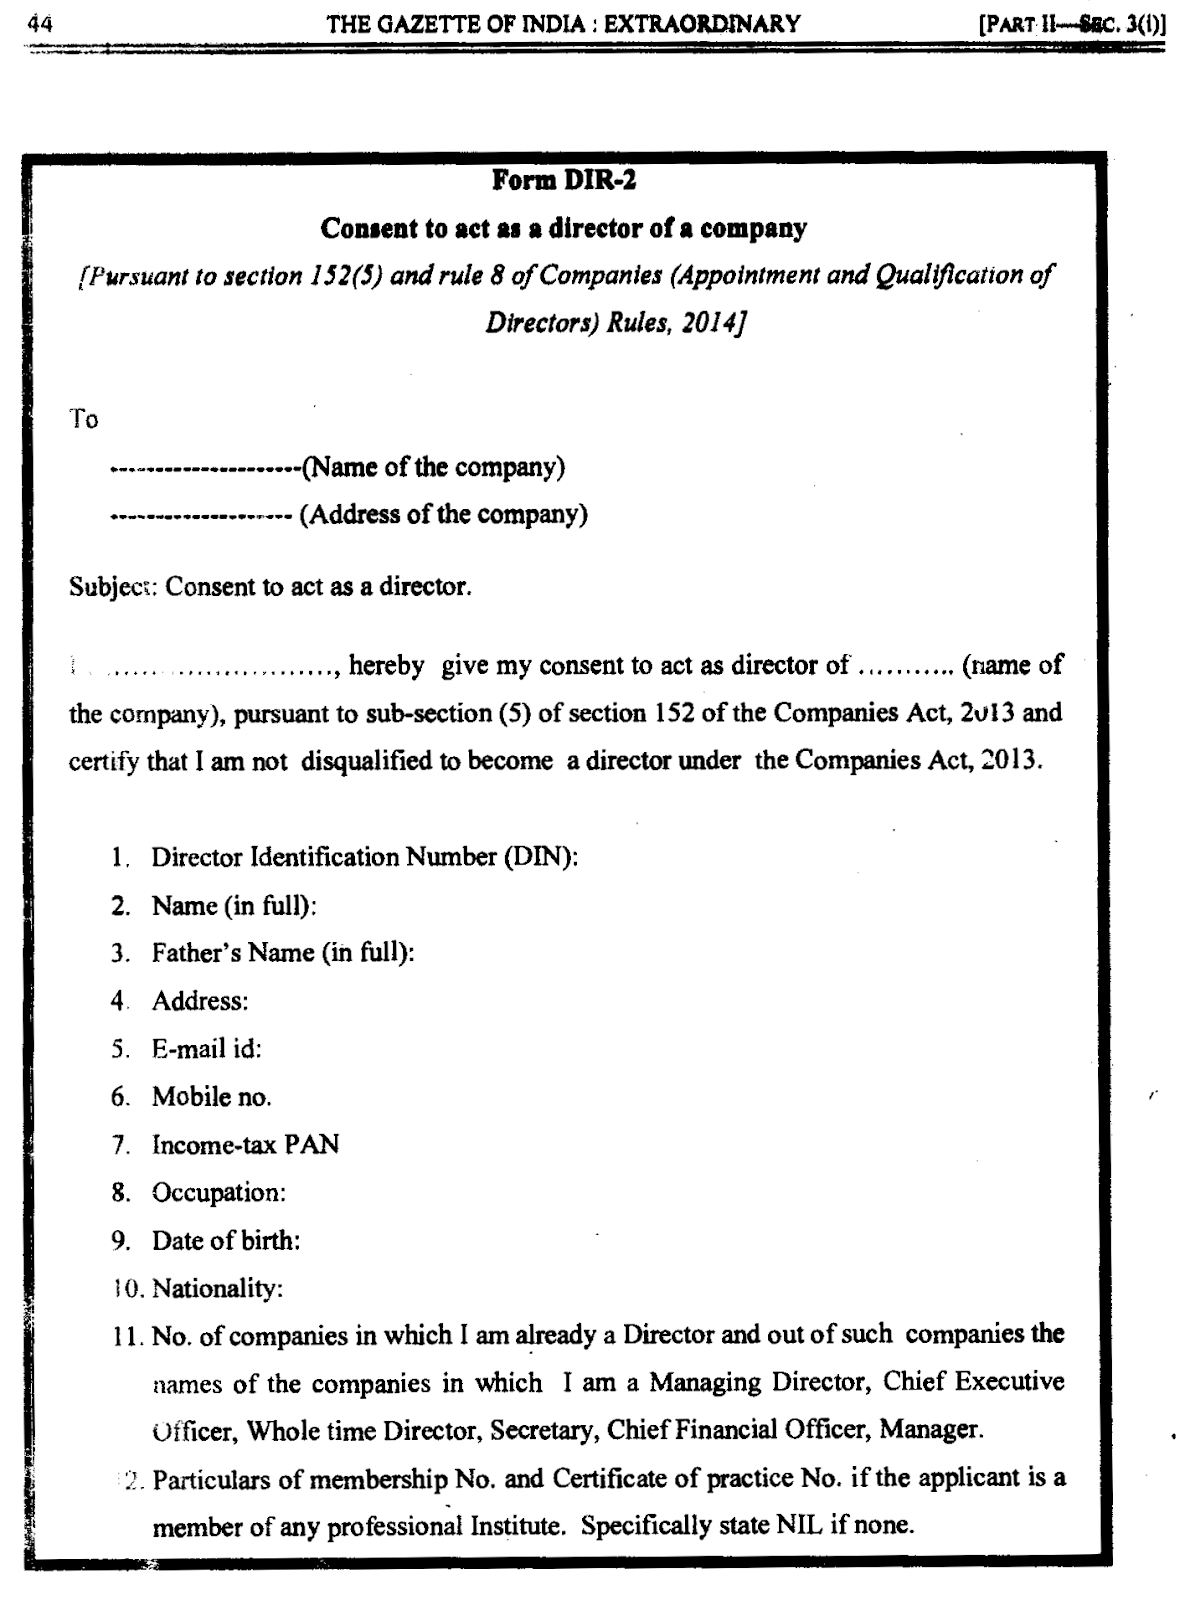 Consent to Act as Director: Letter in Form DIR-30 as per Rule 30